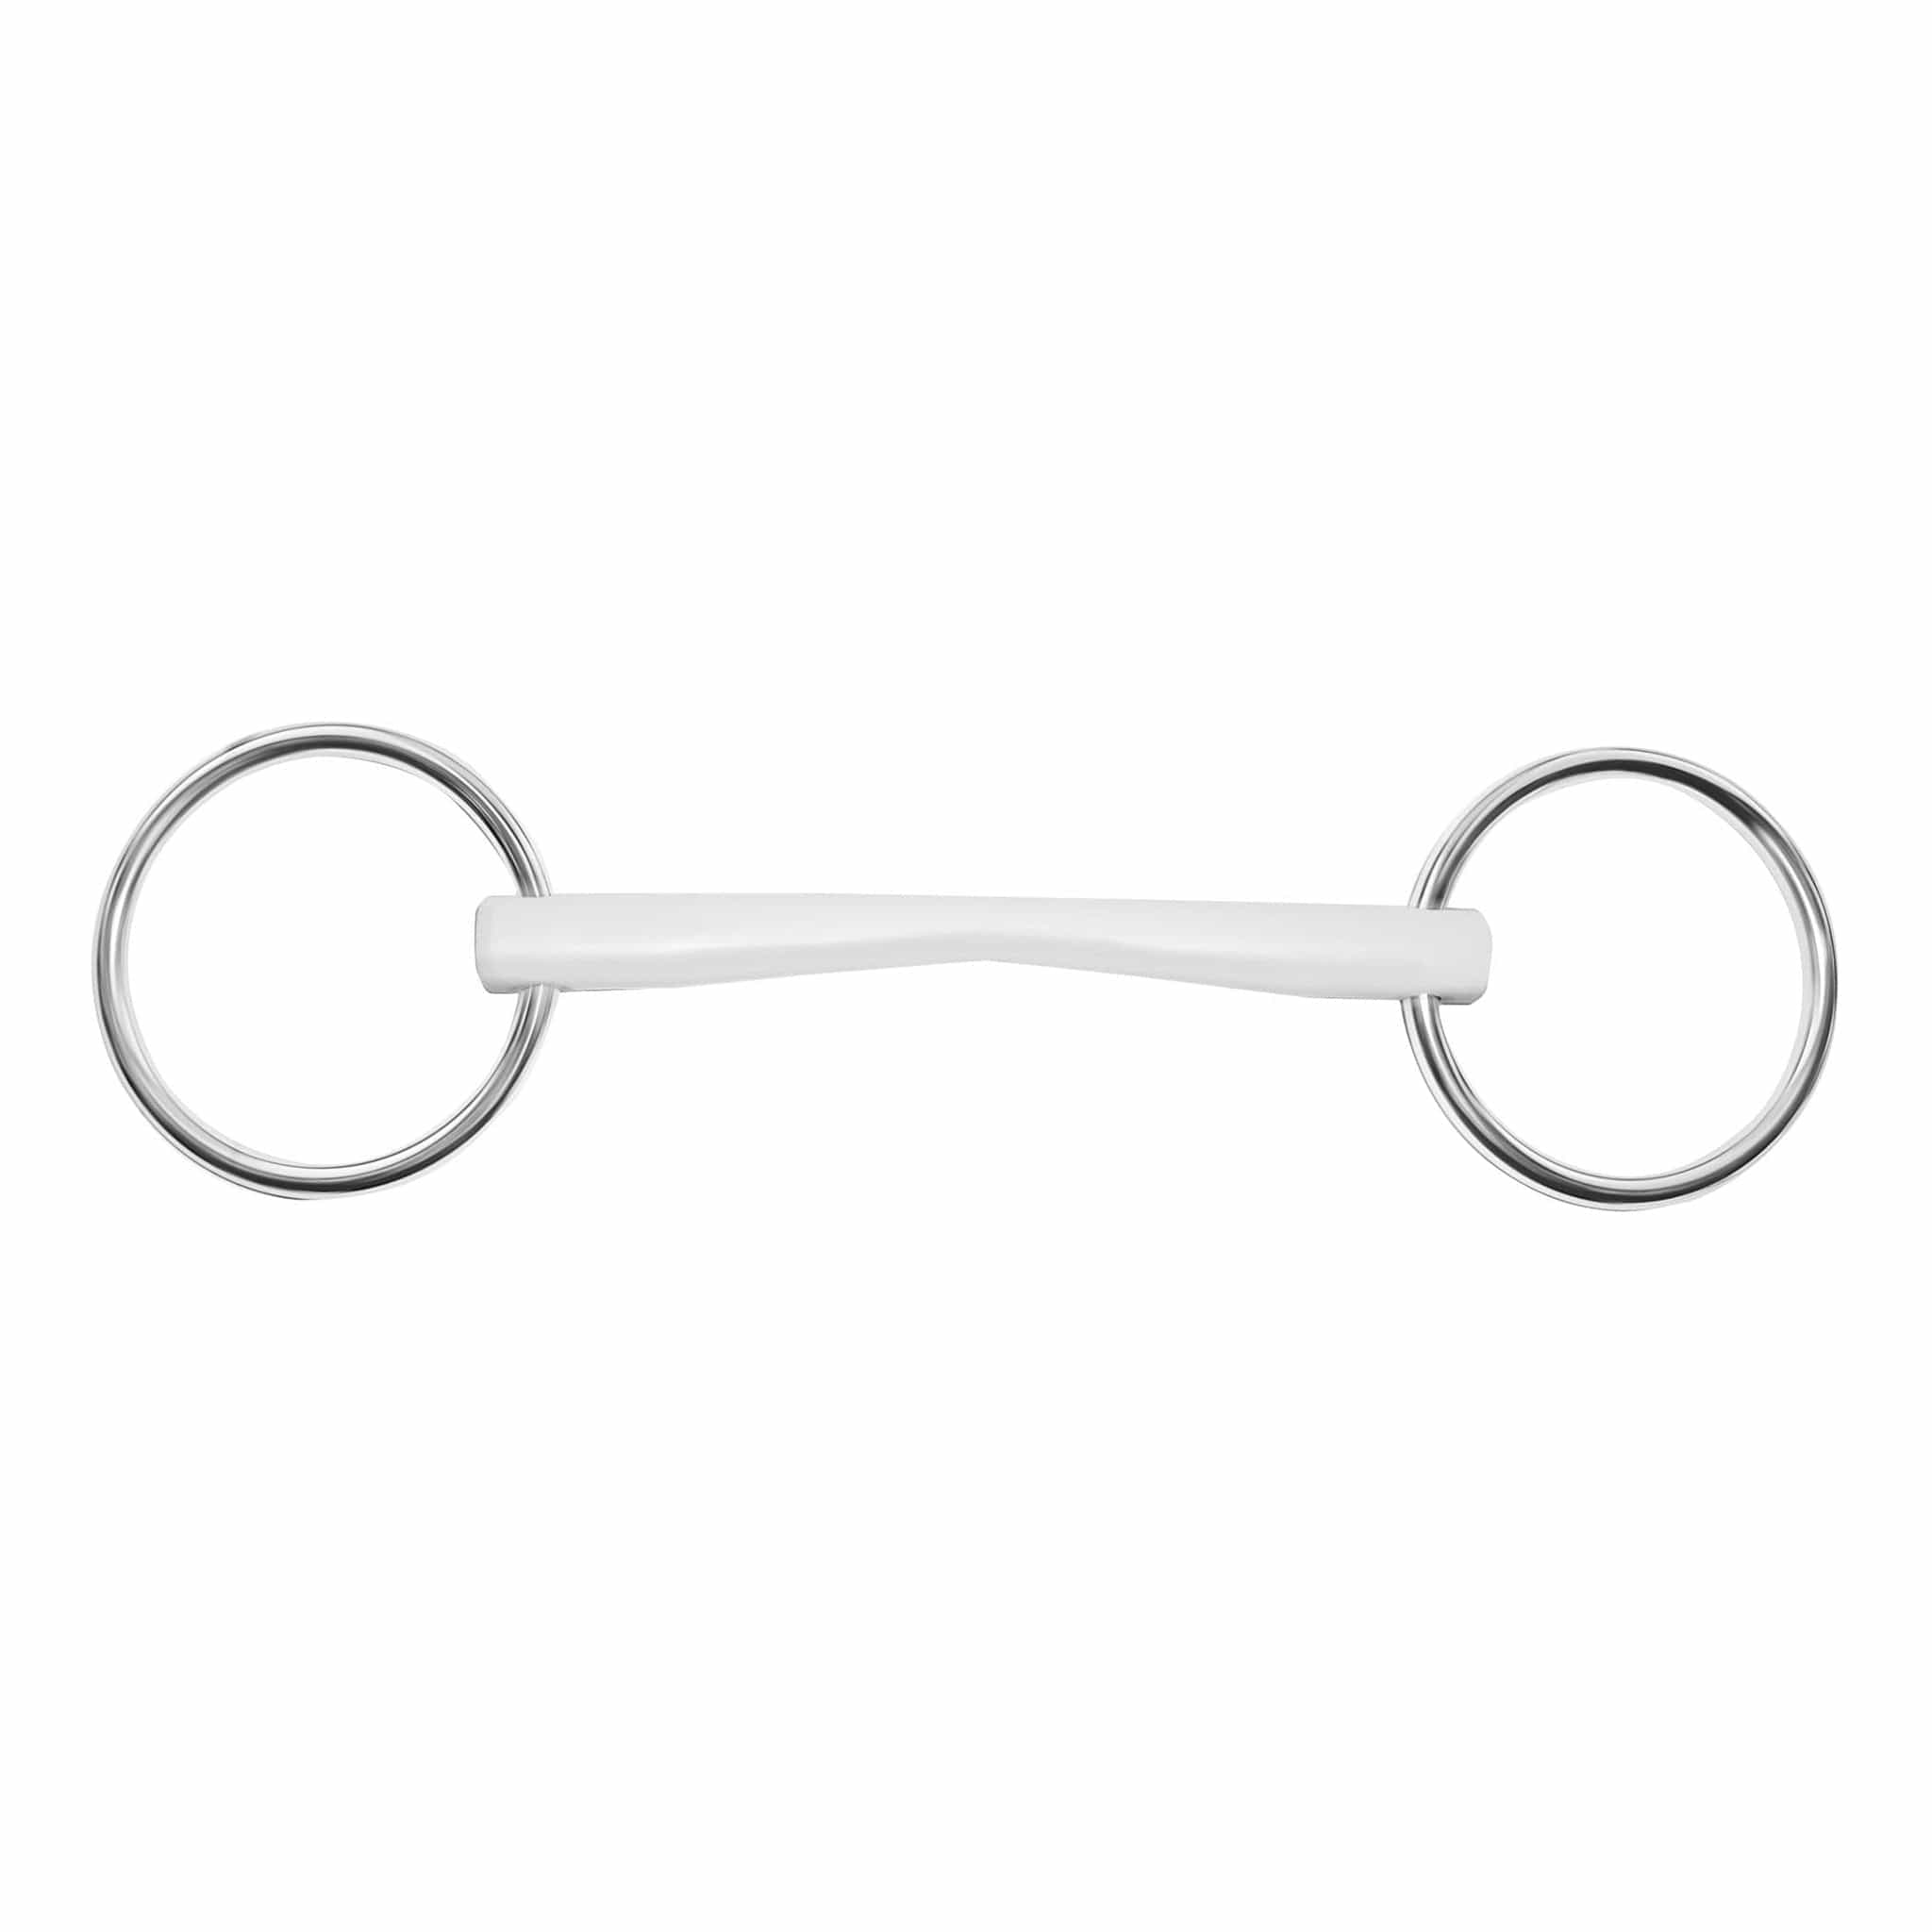 Sprenger Duo Loose Ring Snaffle S40801